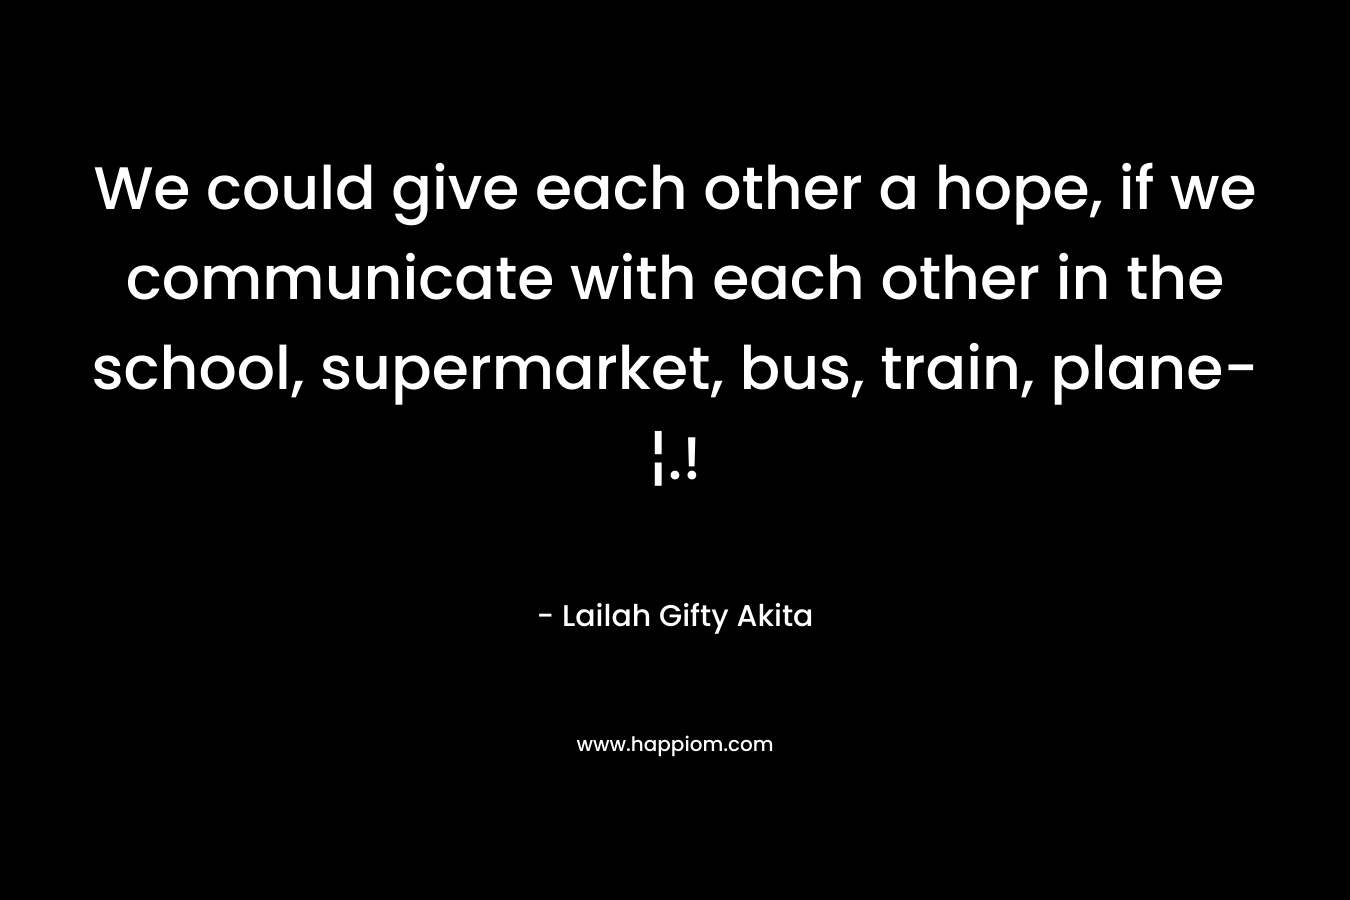 We could give each other a hope, if we communicate with each other in the school, supermarket, bus, train, plane-¦.!